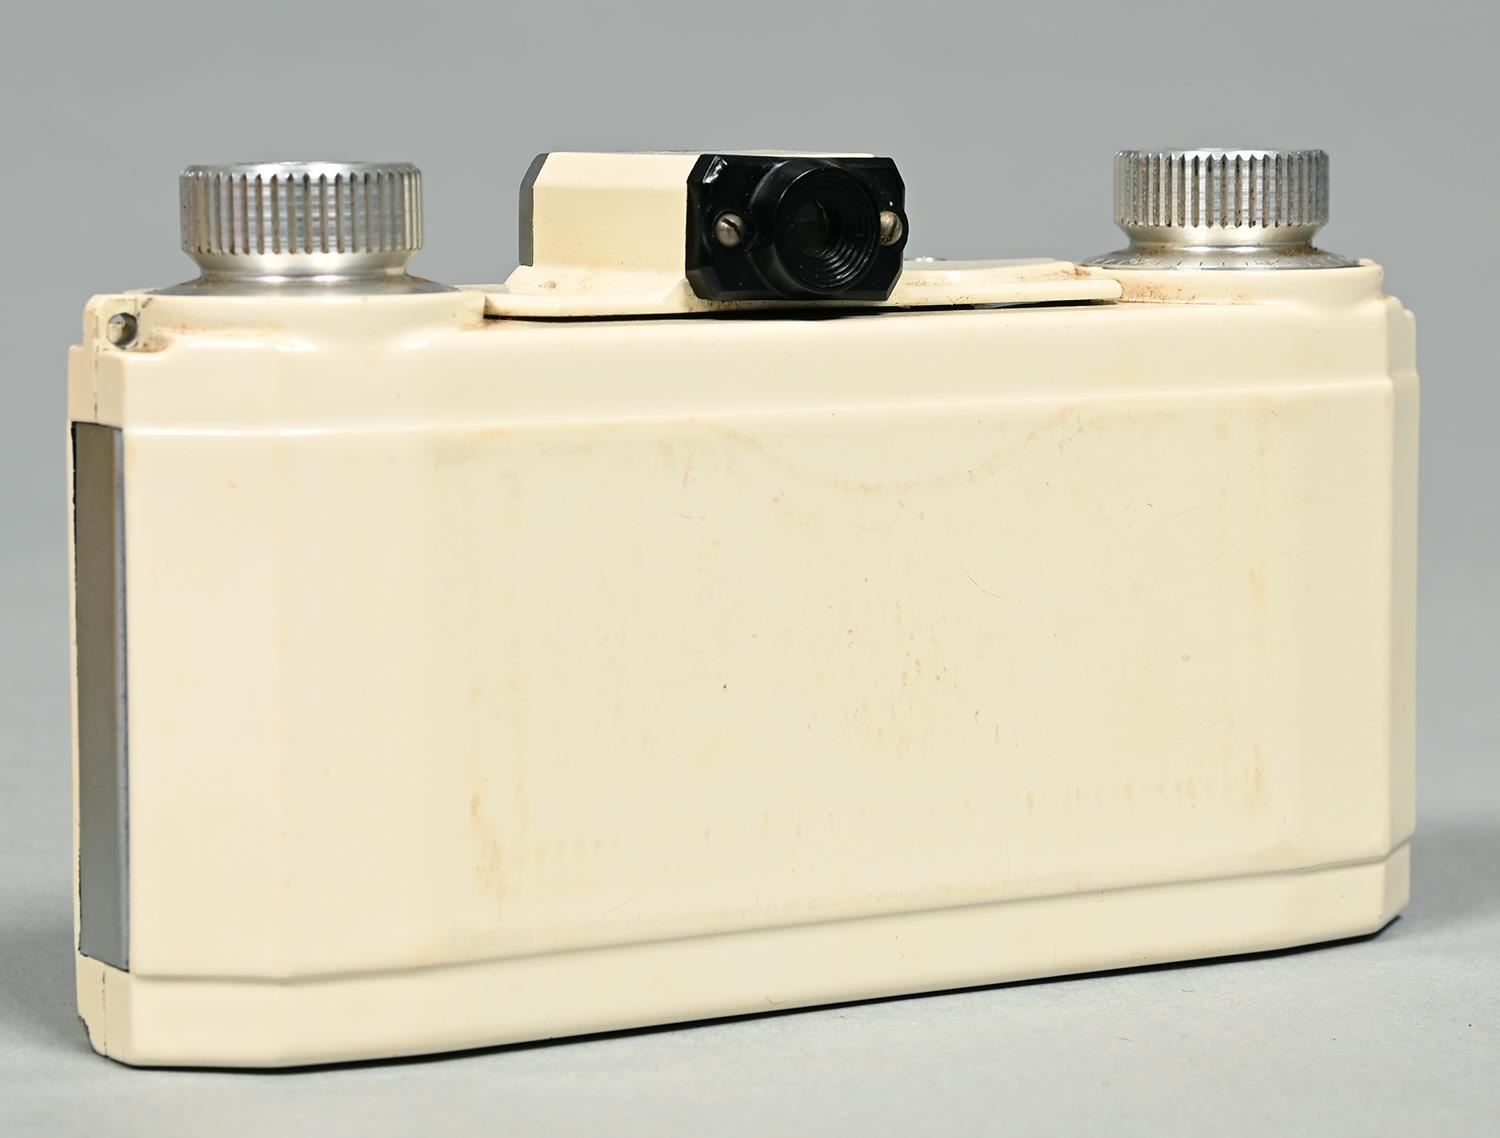 An Ilford Advocate series one roll film camera, with cream enamel finish, with F35mm Dallmeyer lens, - Image 2 of 3